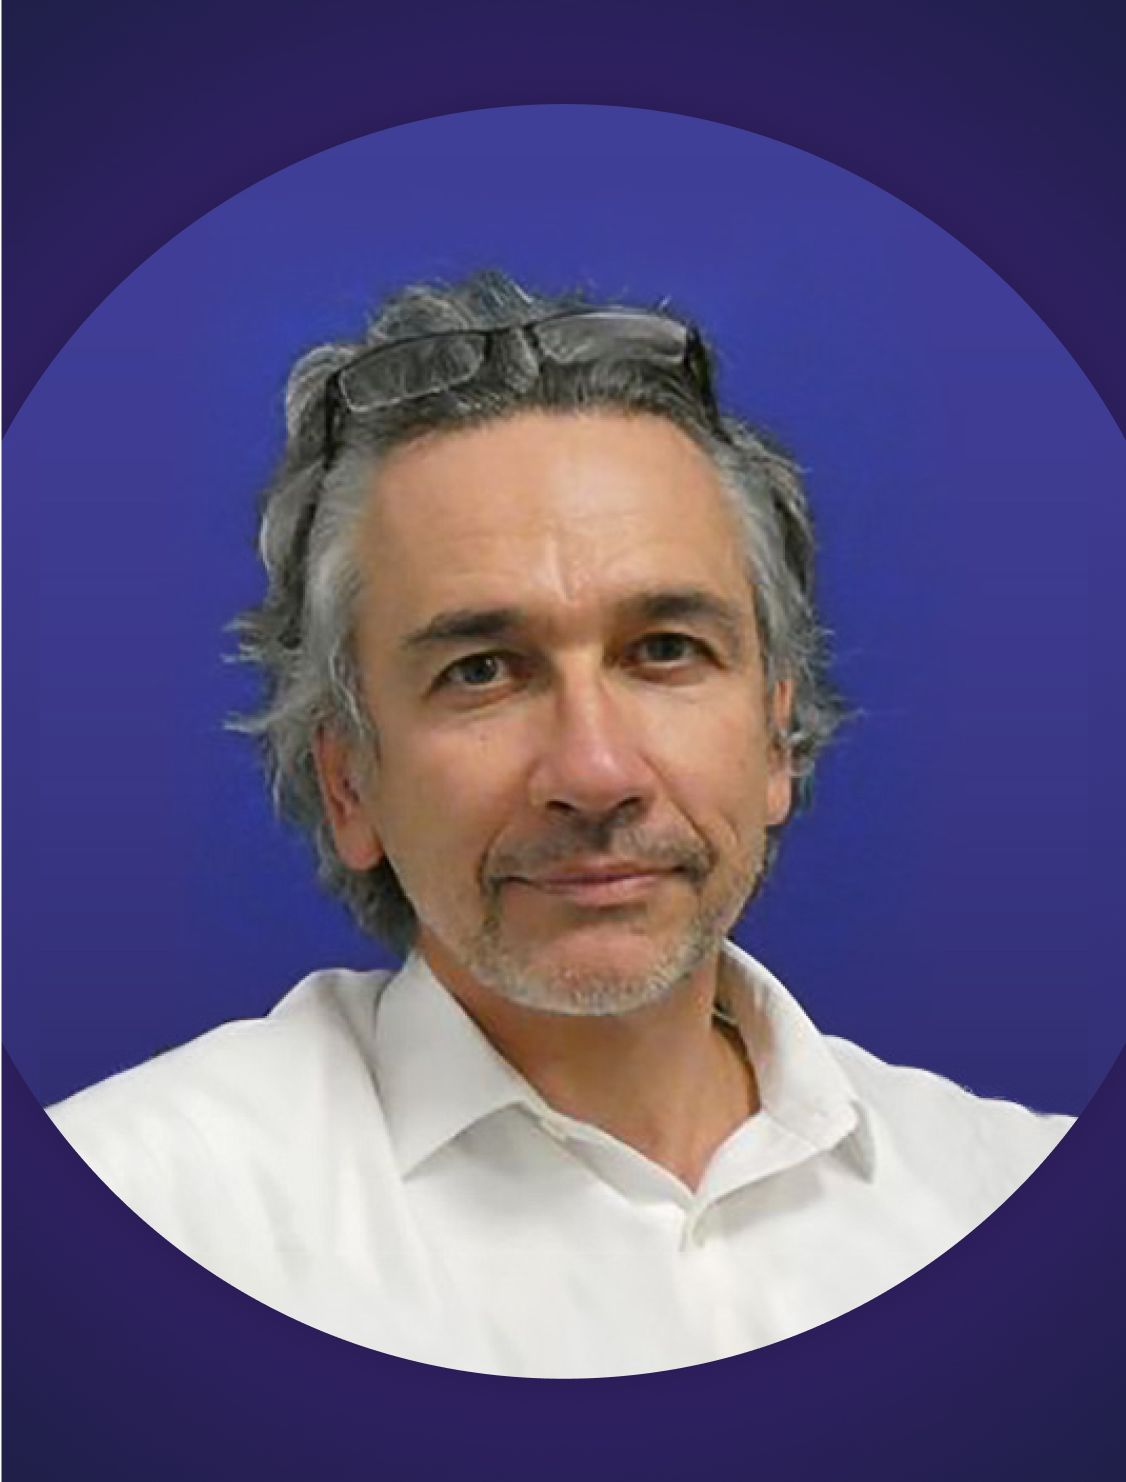 Voom Medical Devices Welcomes Dr. Joël Vernois as Advisor and Editor-in-Chief of Journal of Minimally Invasive Bunion Surgery (JMIBS)